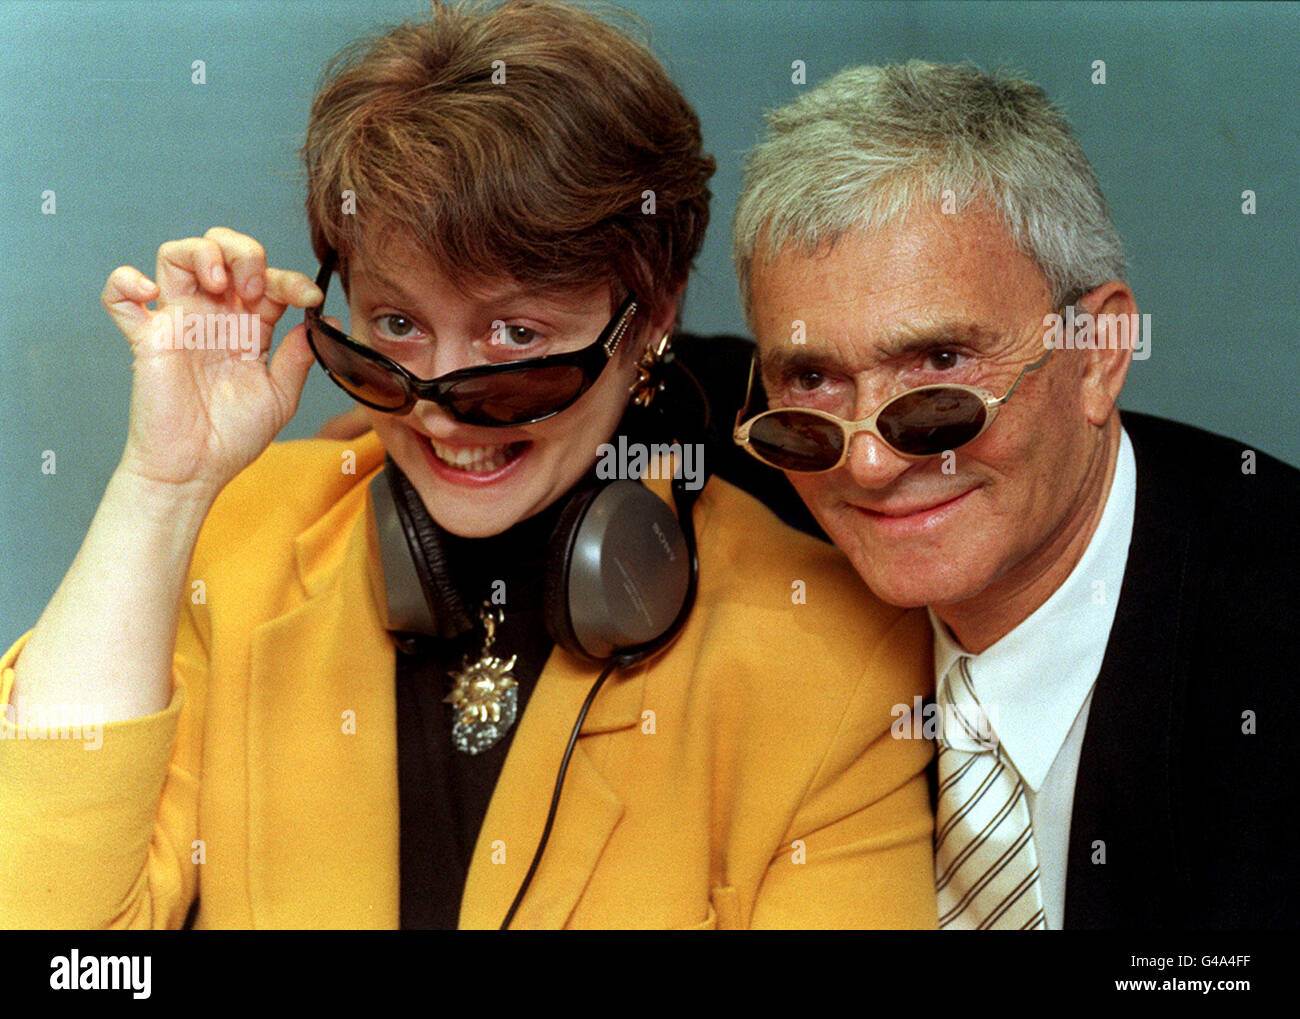 PA NEWS PHOTO 23/2/98 BREAKFAST SHOW PRESENTER ANNE DIAMOND IS JOINED BY CELEBRITY HAIRDRESSER VIDAL SASSOON FOR THE LAUNCH OF NATIONAL SUNGLASSES DAY, LONDON. Stock Photo